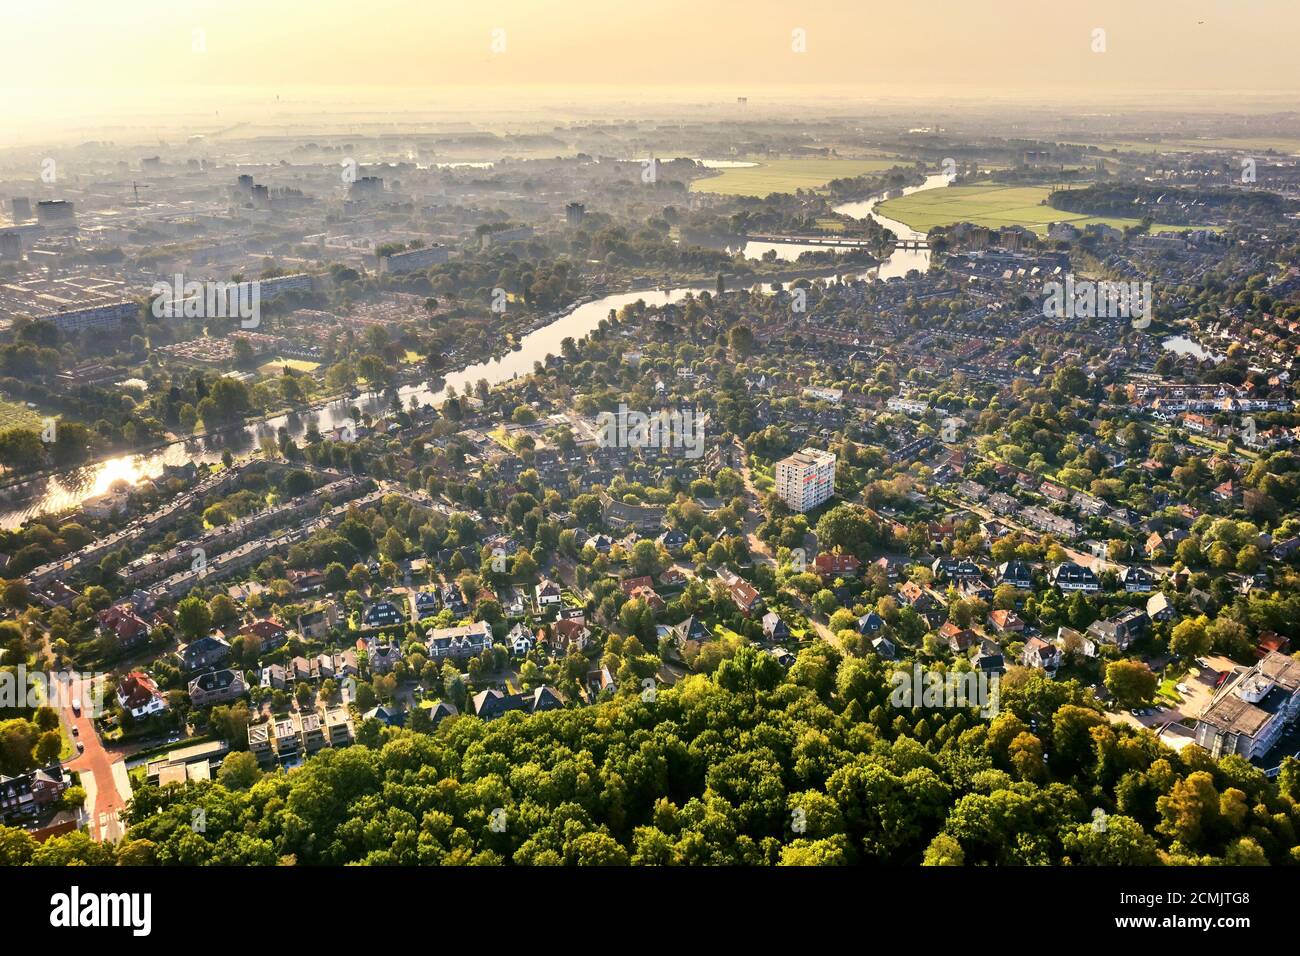 Netherlands, Haarlem - 17-08-2020: view from high above on the city of Haarlem Stock Photo